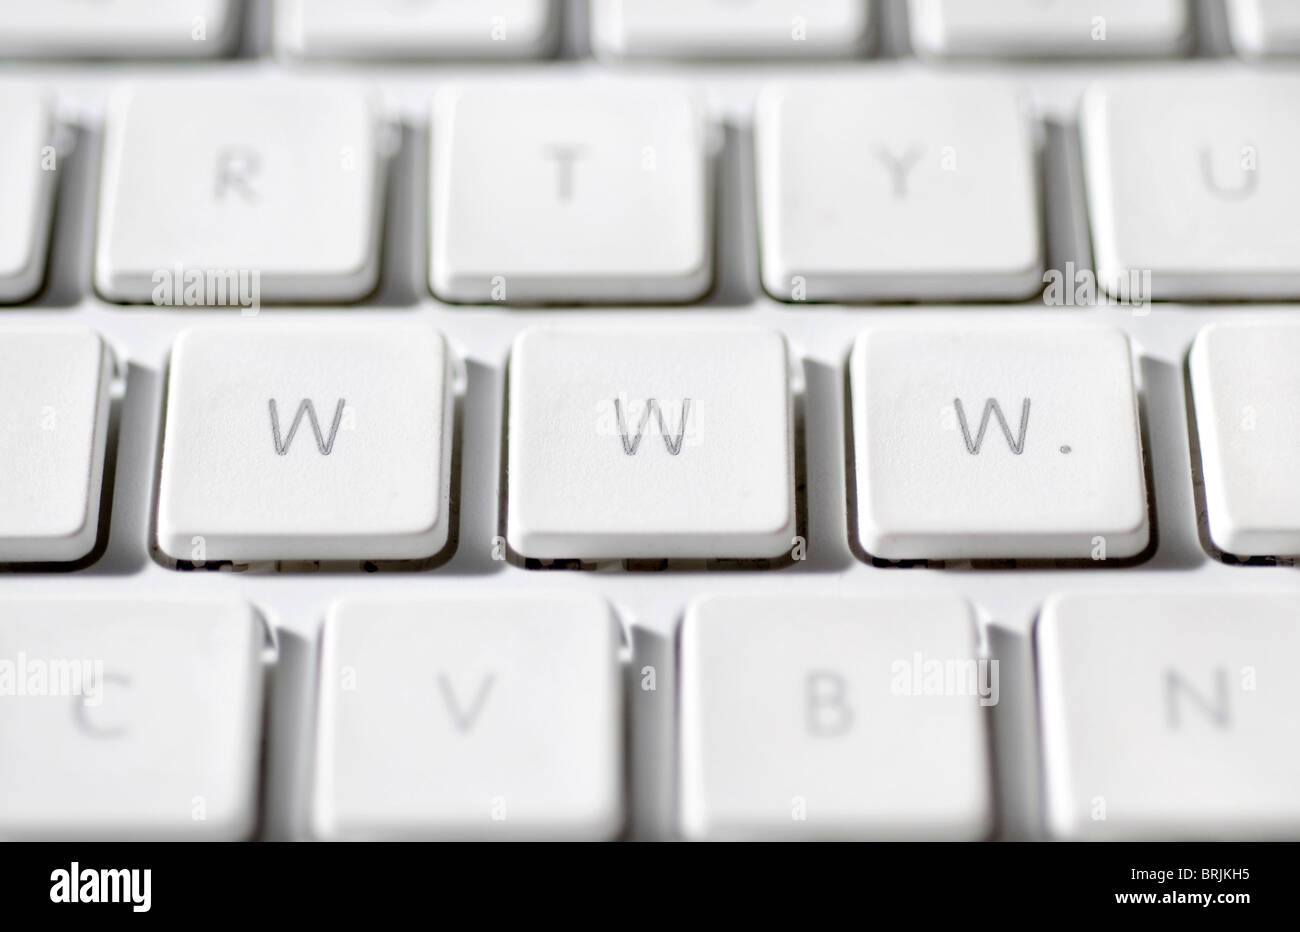 World wide web abbreviated as 'www.' on laptop computer keyboard Stock Photo